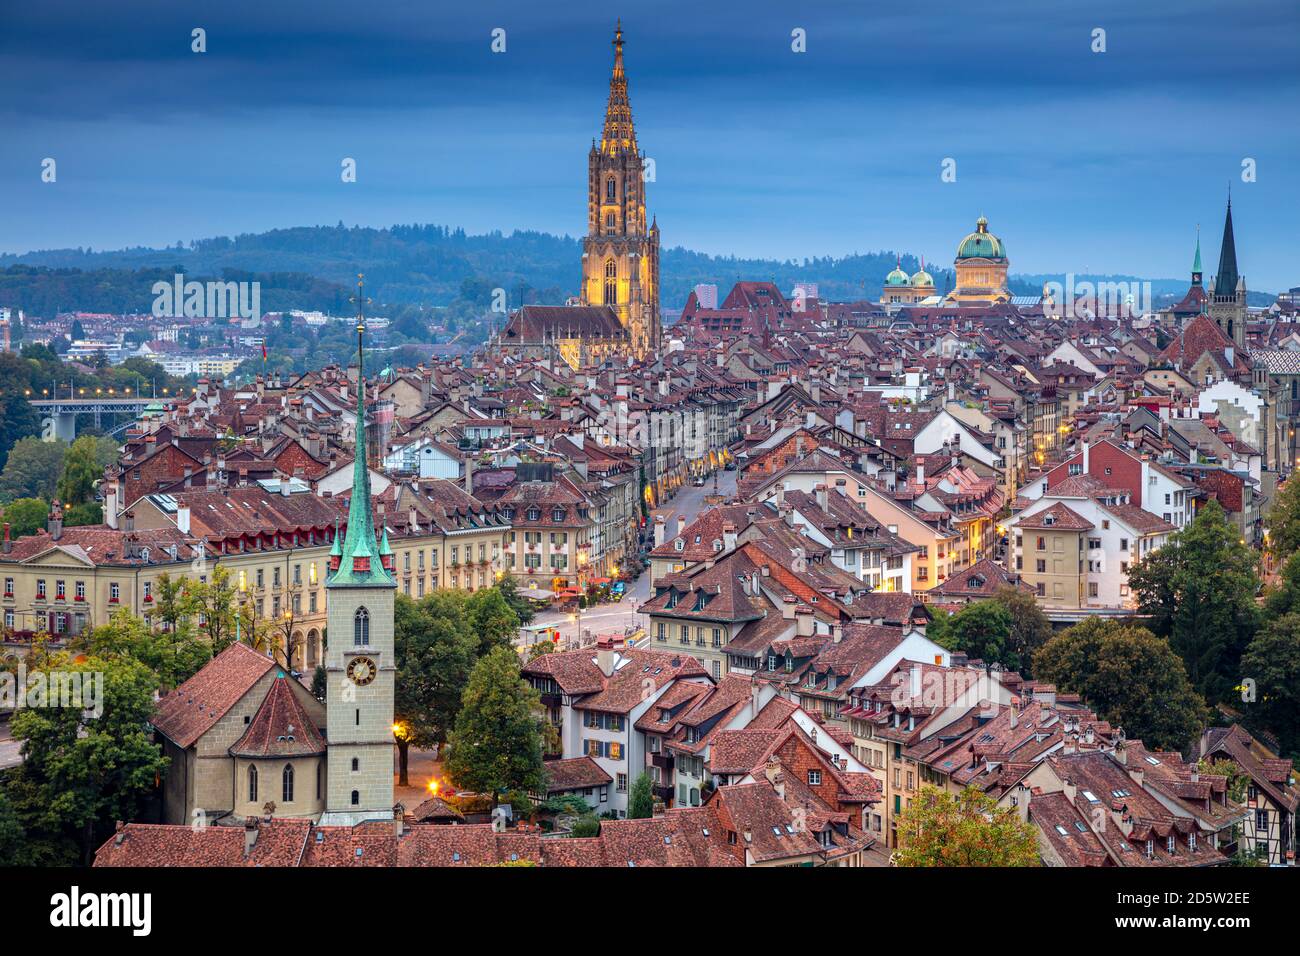 City of Bern. Aerial cityscape image of the capital city of Bern, Switzerland at twilight blue hour. Stock Photo